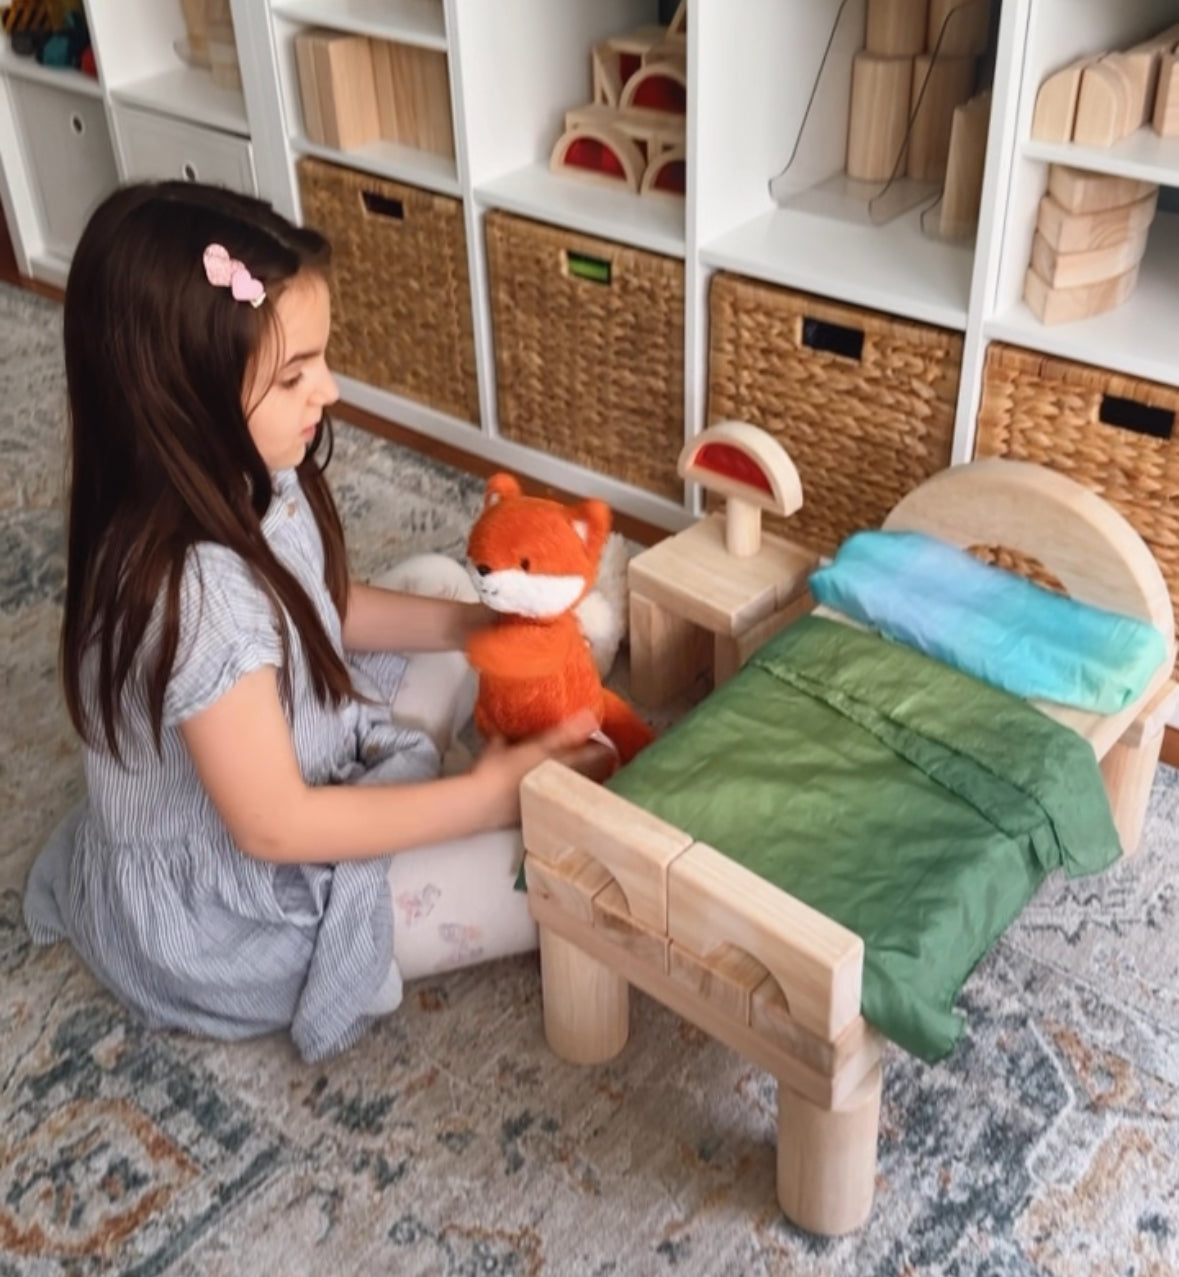 How to Create Opportunities for Learning through Pretend Play